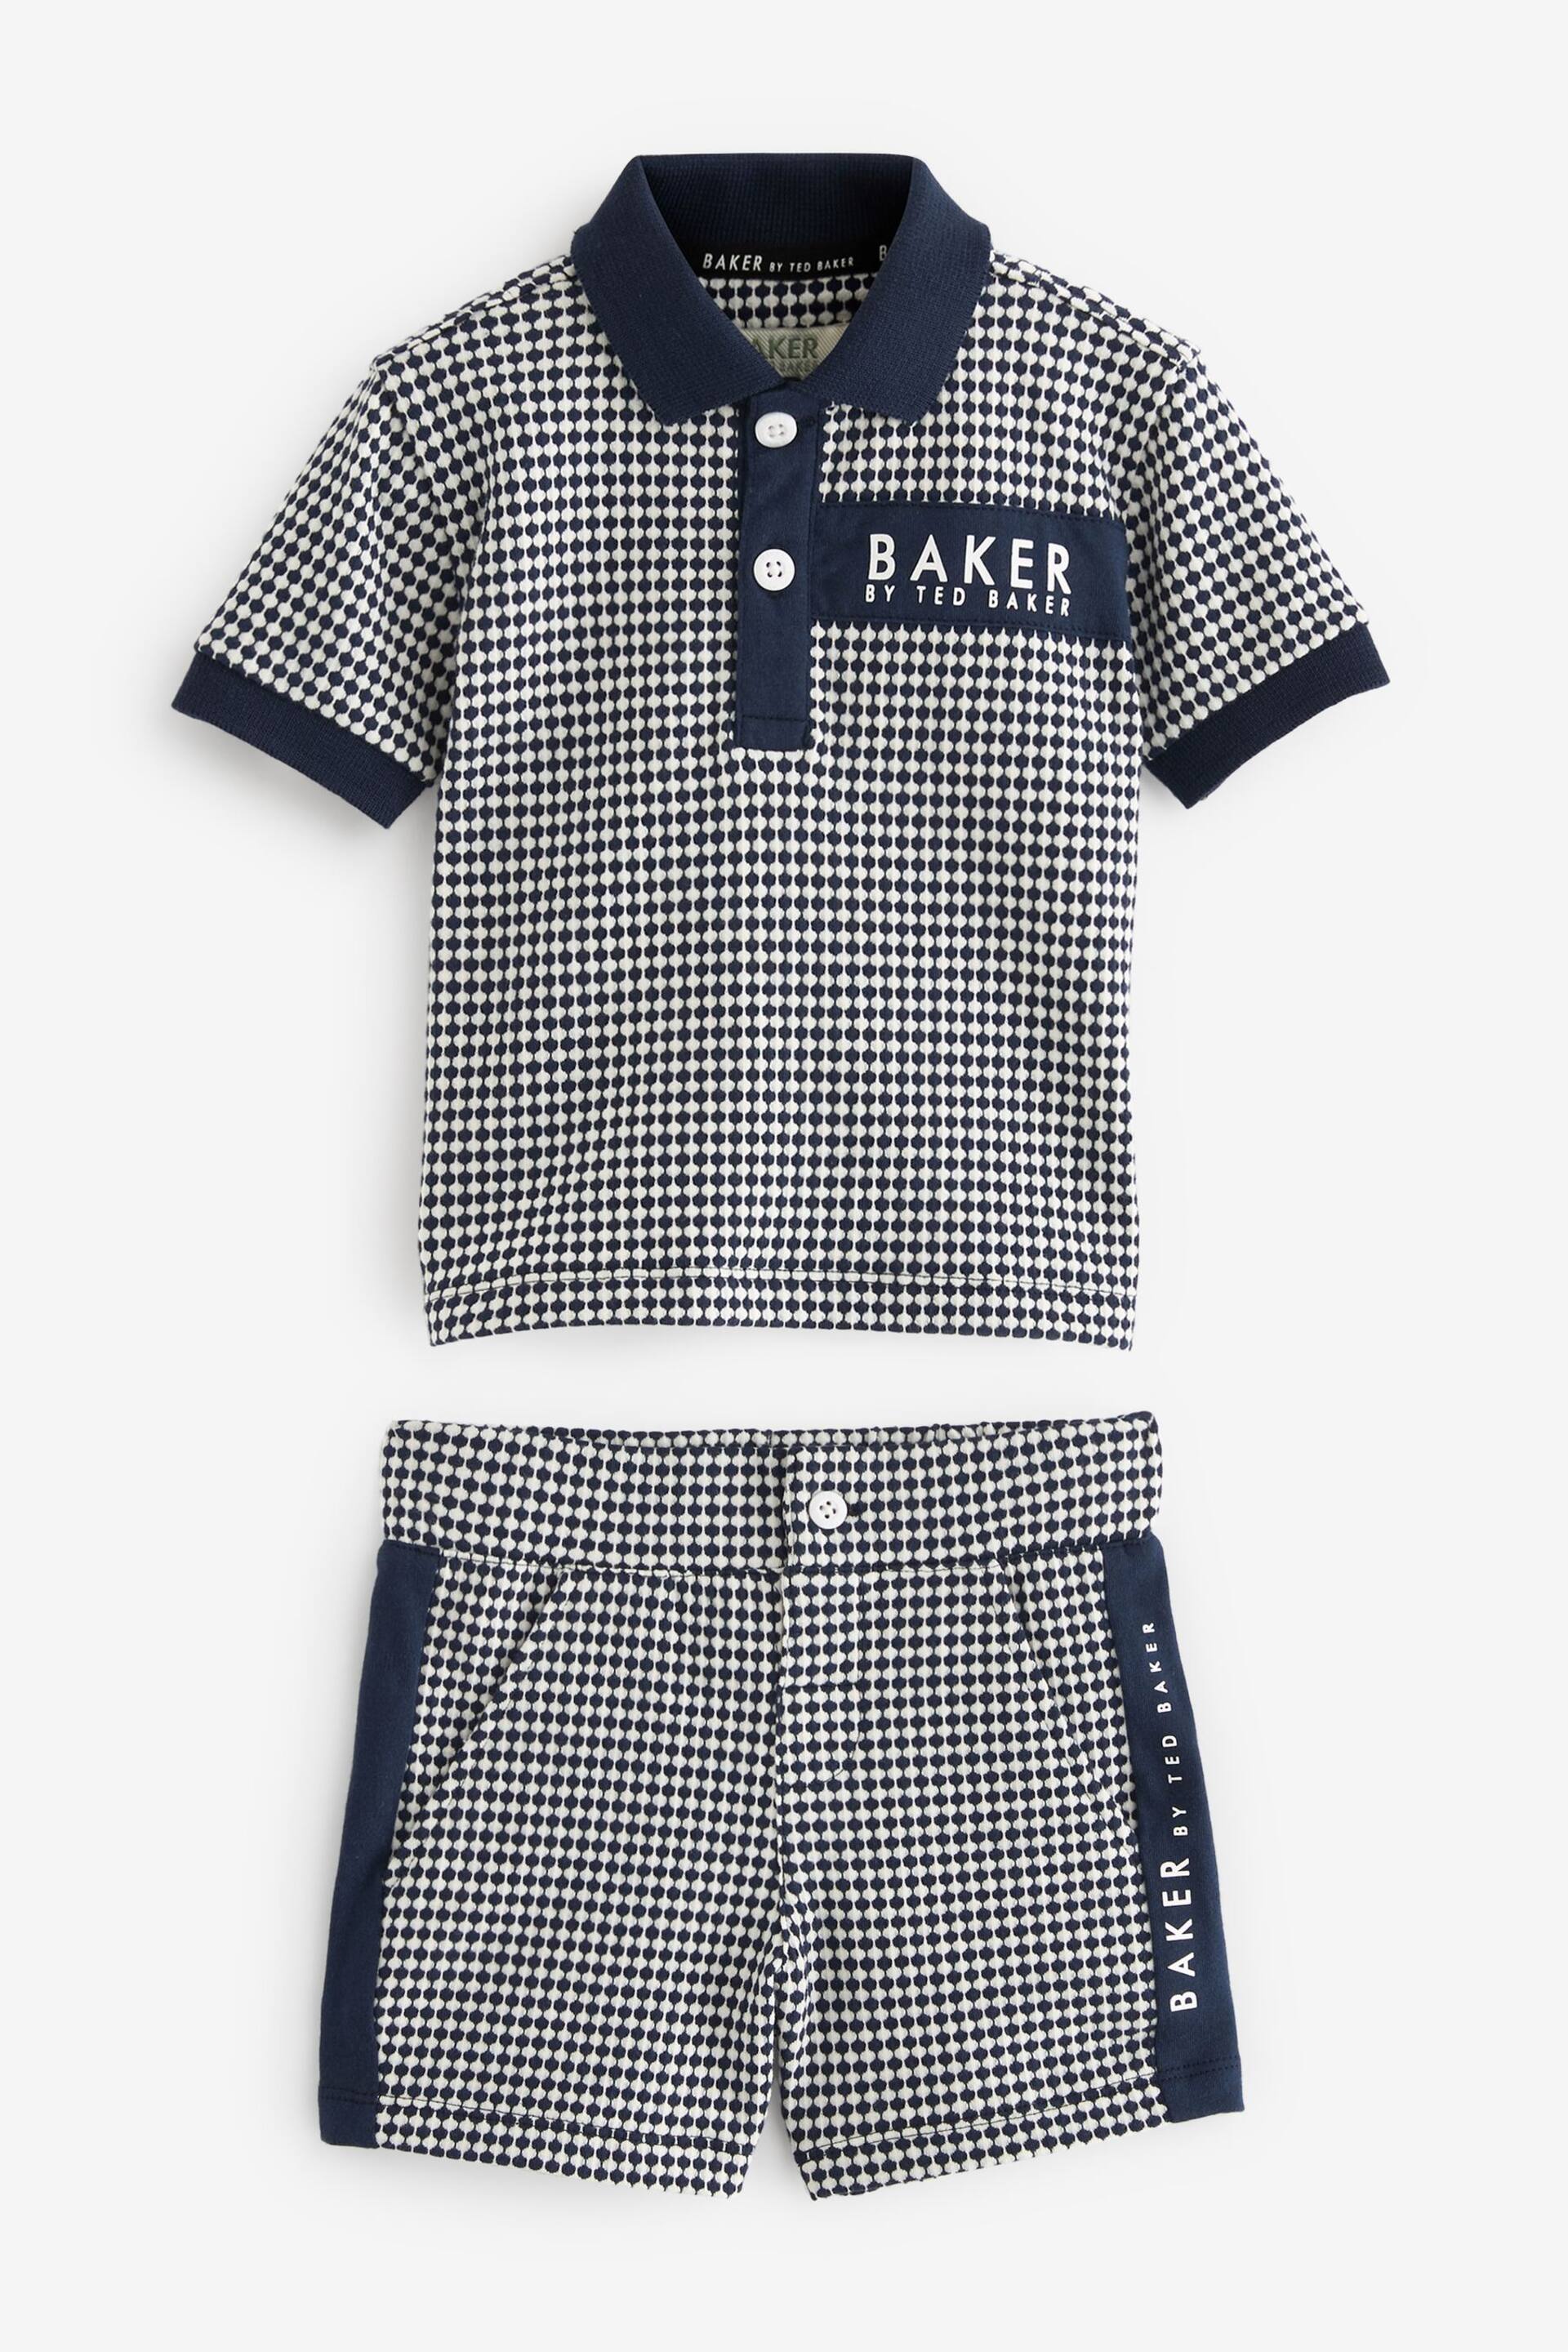 Baker by Ted Baker Textured Polo Shirt and Short Set - Image 7 of 10